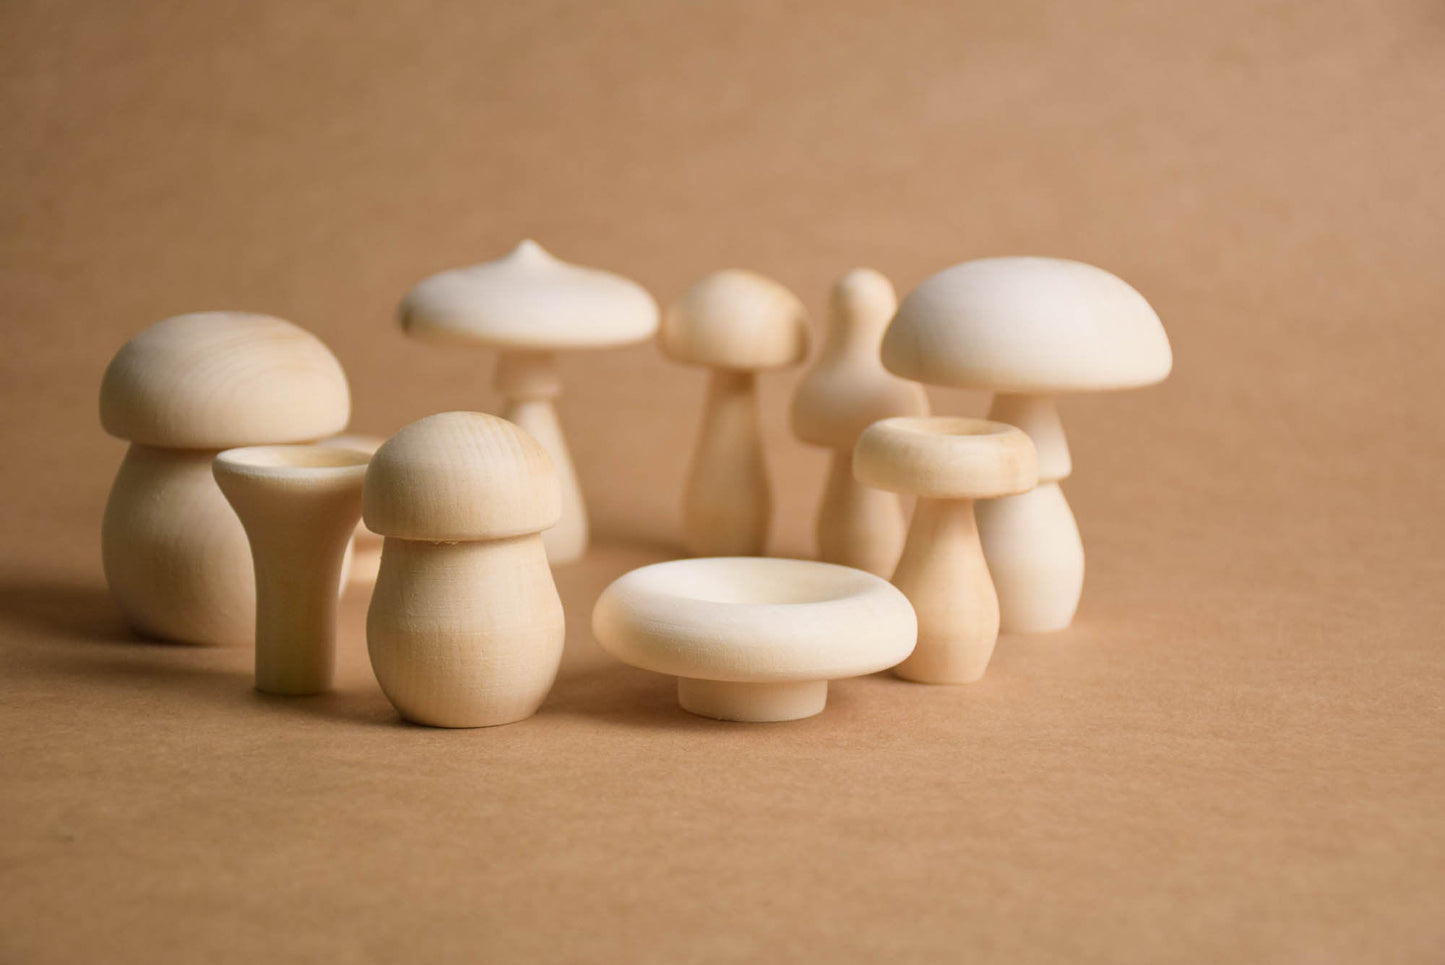 Wooden Miniature Mushroom Unfinished Set for Fairy Garden or Baby